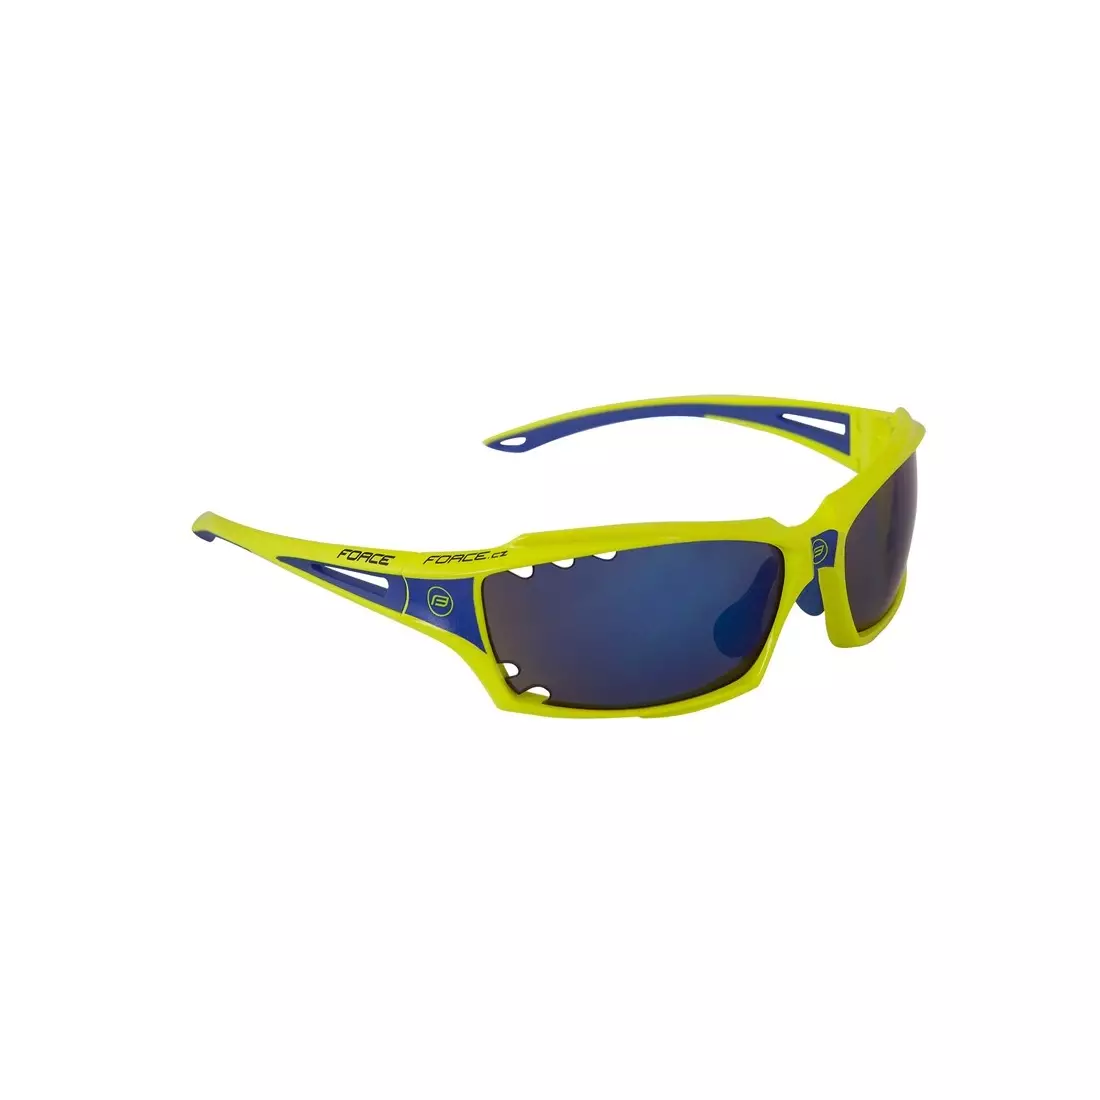 FORCE VISION Cycling/sports glasses fluo 90973 replaceable lenses